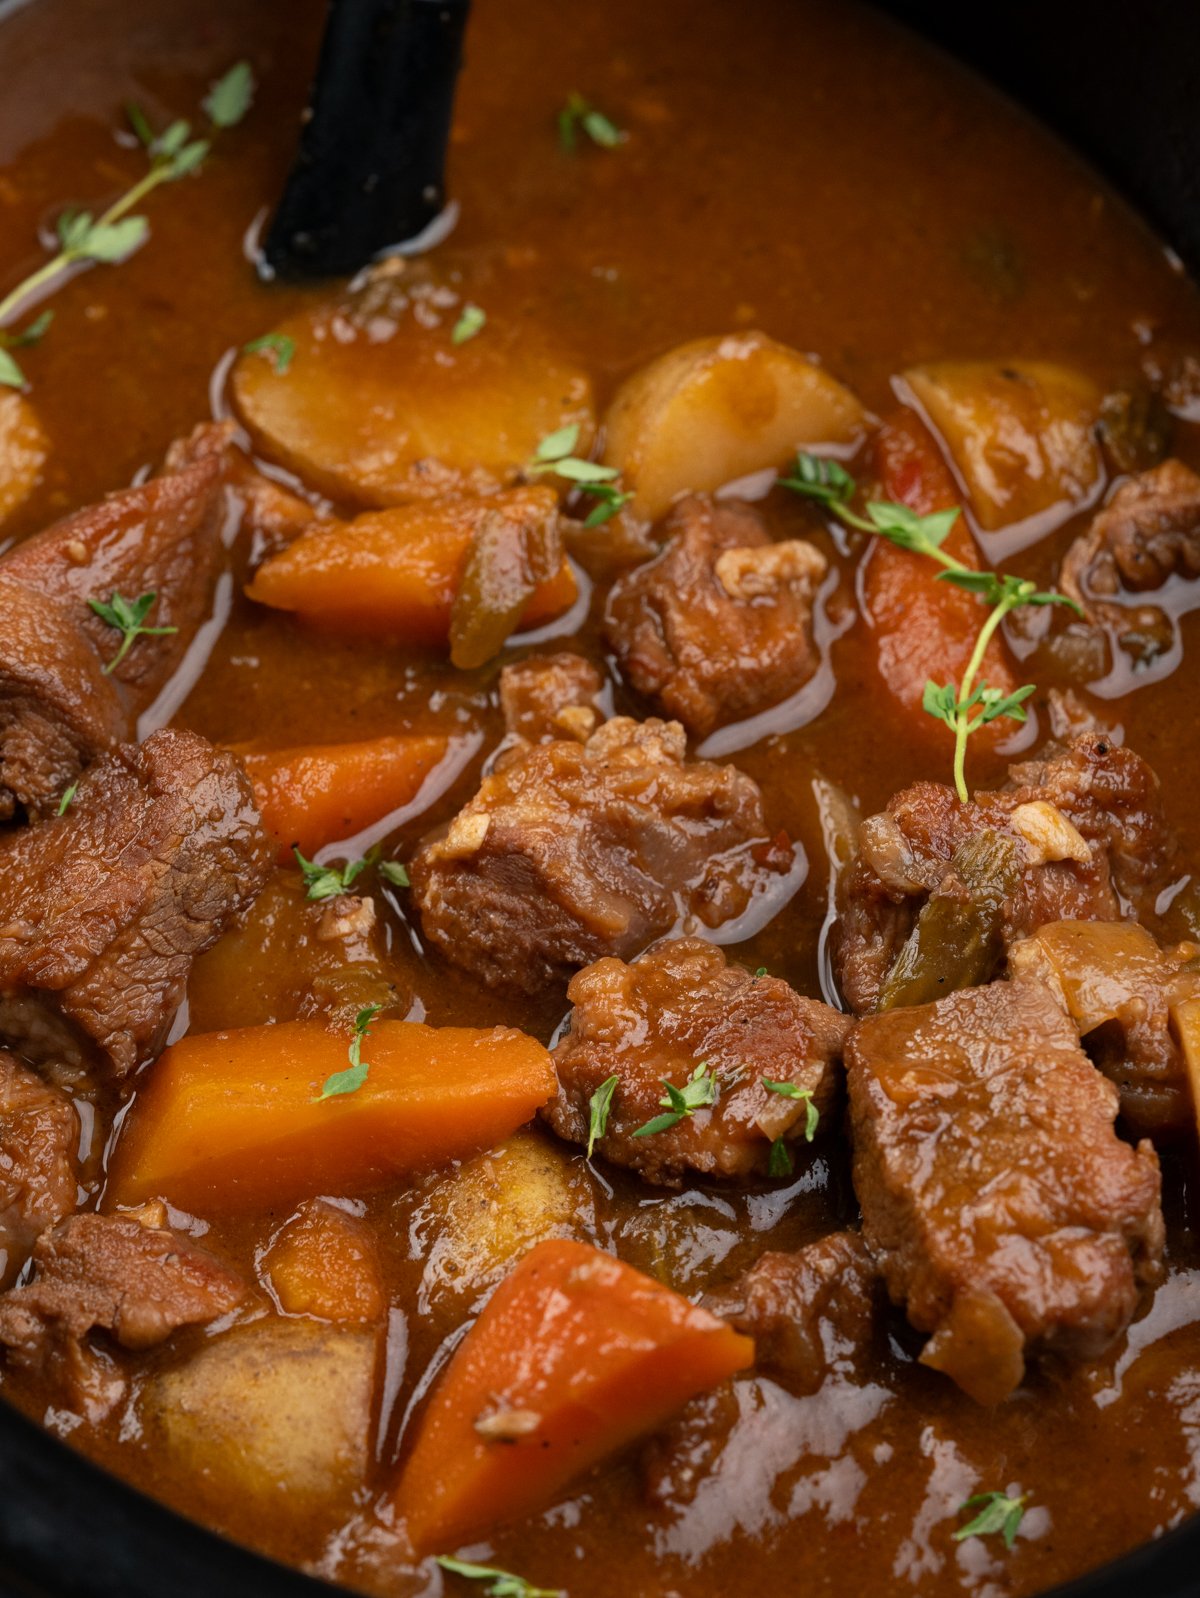 Slow-cooker lamb stew with tender, fall-apart lamb chunks, potatoes and carrot has a rustic flavourful thick broth